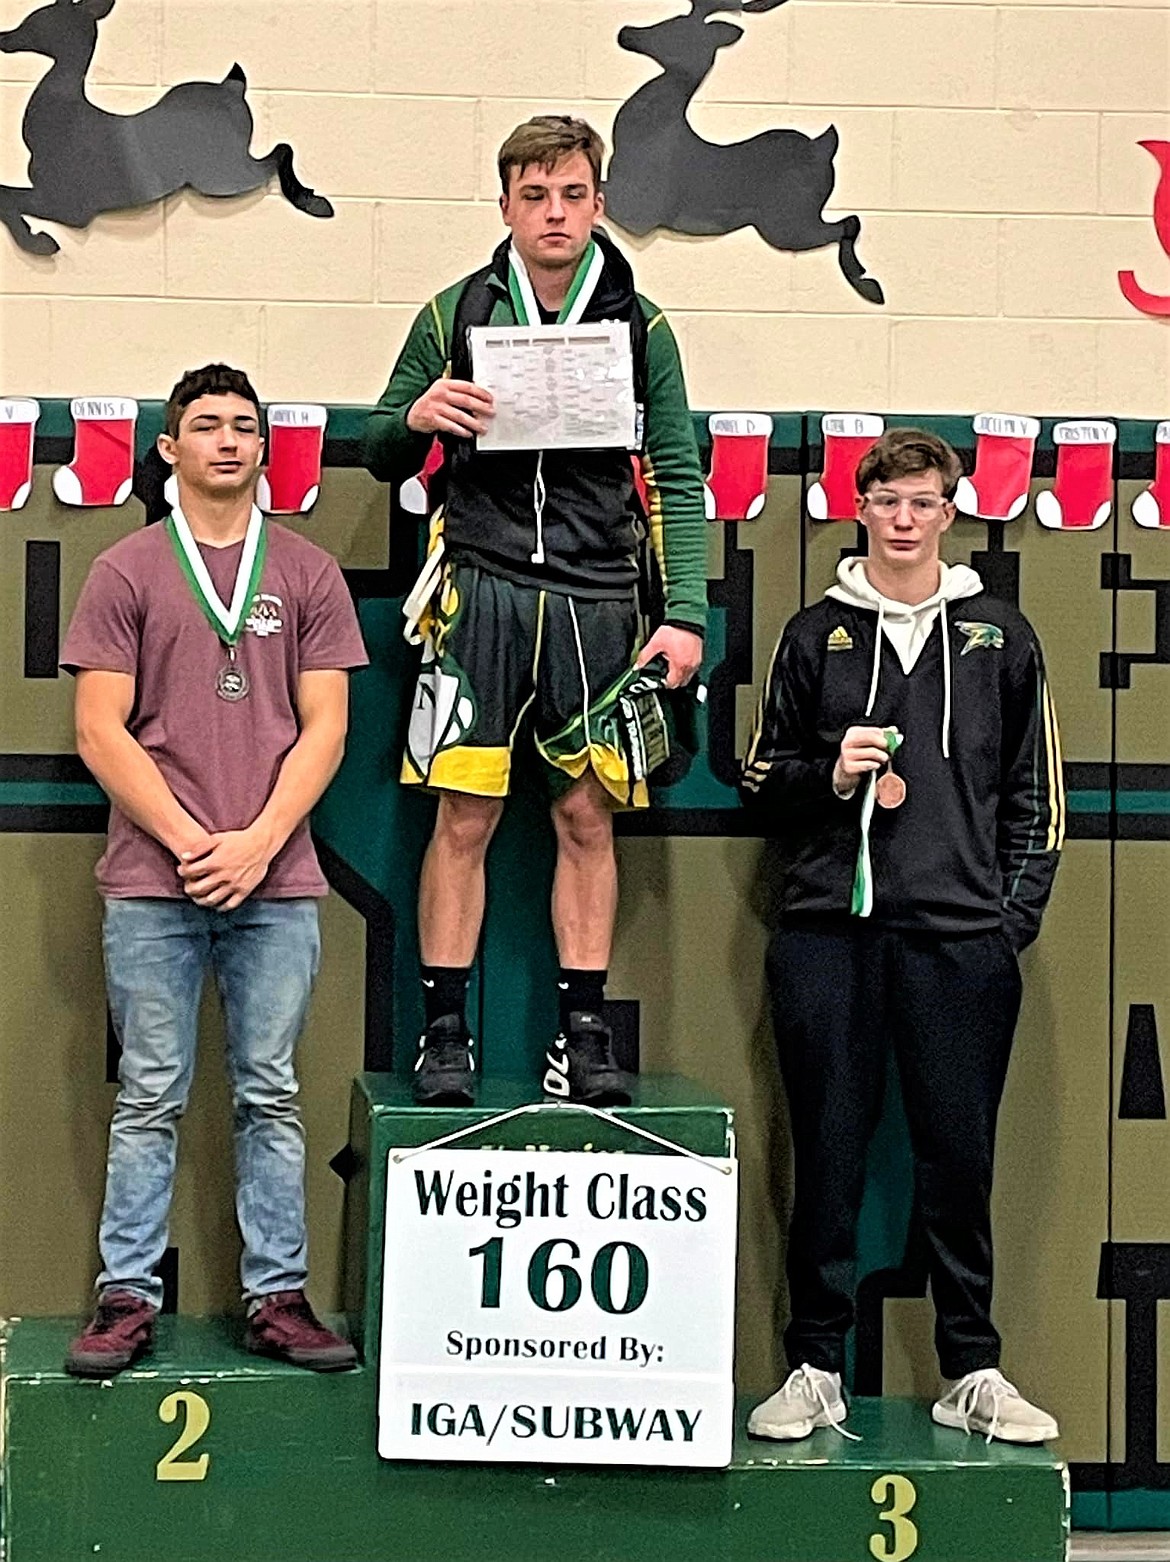 (left) Danny Zech came in second for the 160 pound weight class at the Chad E. Ross wrestling tournament Dec. 30 at St. Maries.